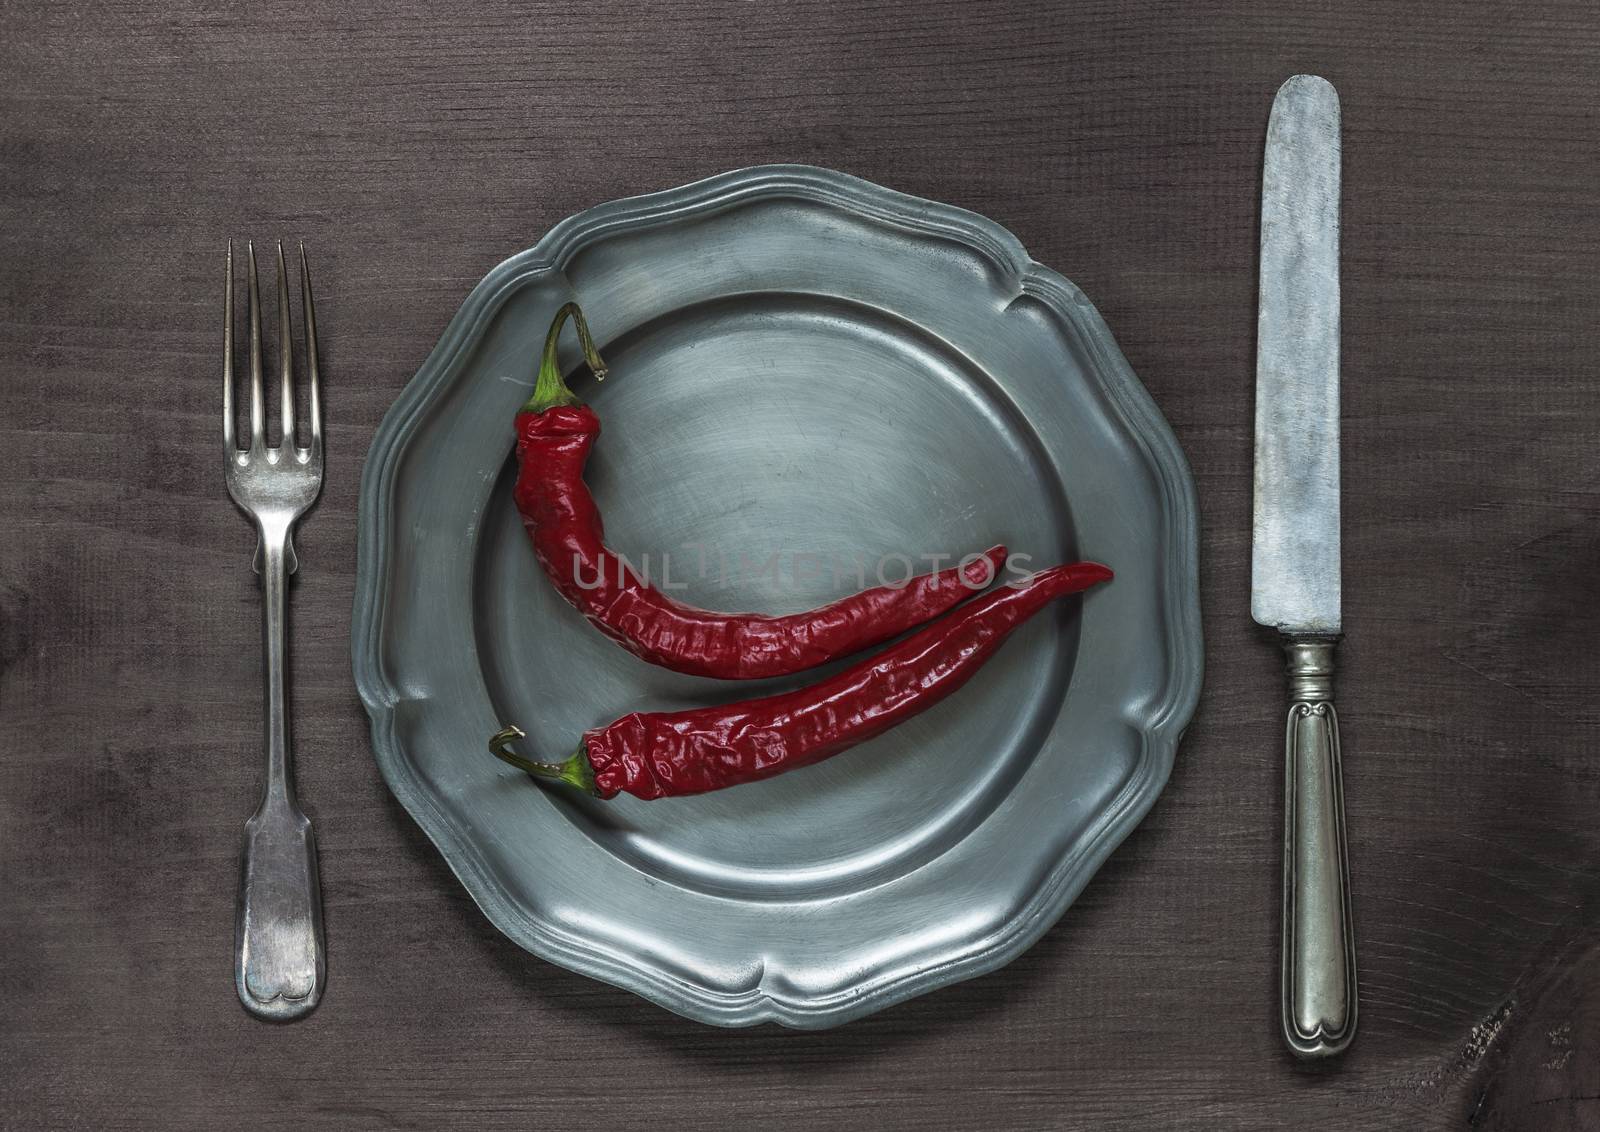 Two red hot chilli peppers on antique pewter plate, as well as vintage fork and knife on old brown dark wooden board